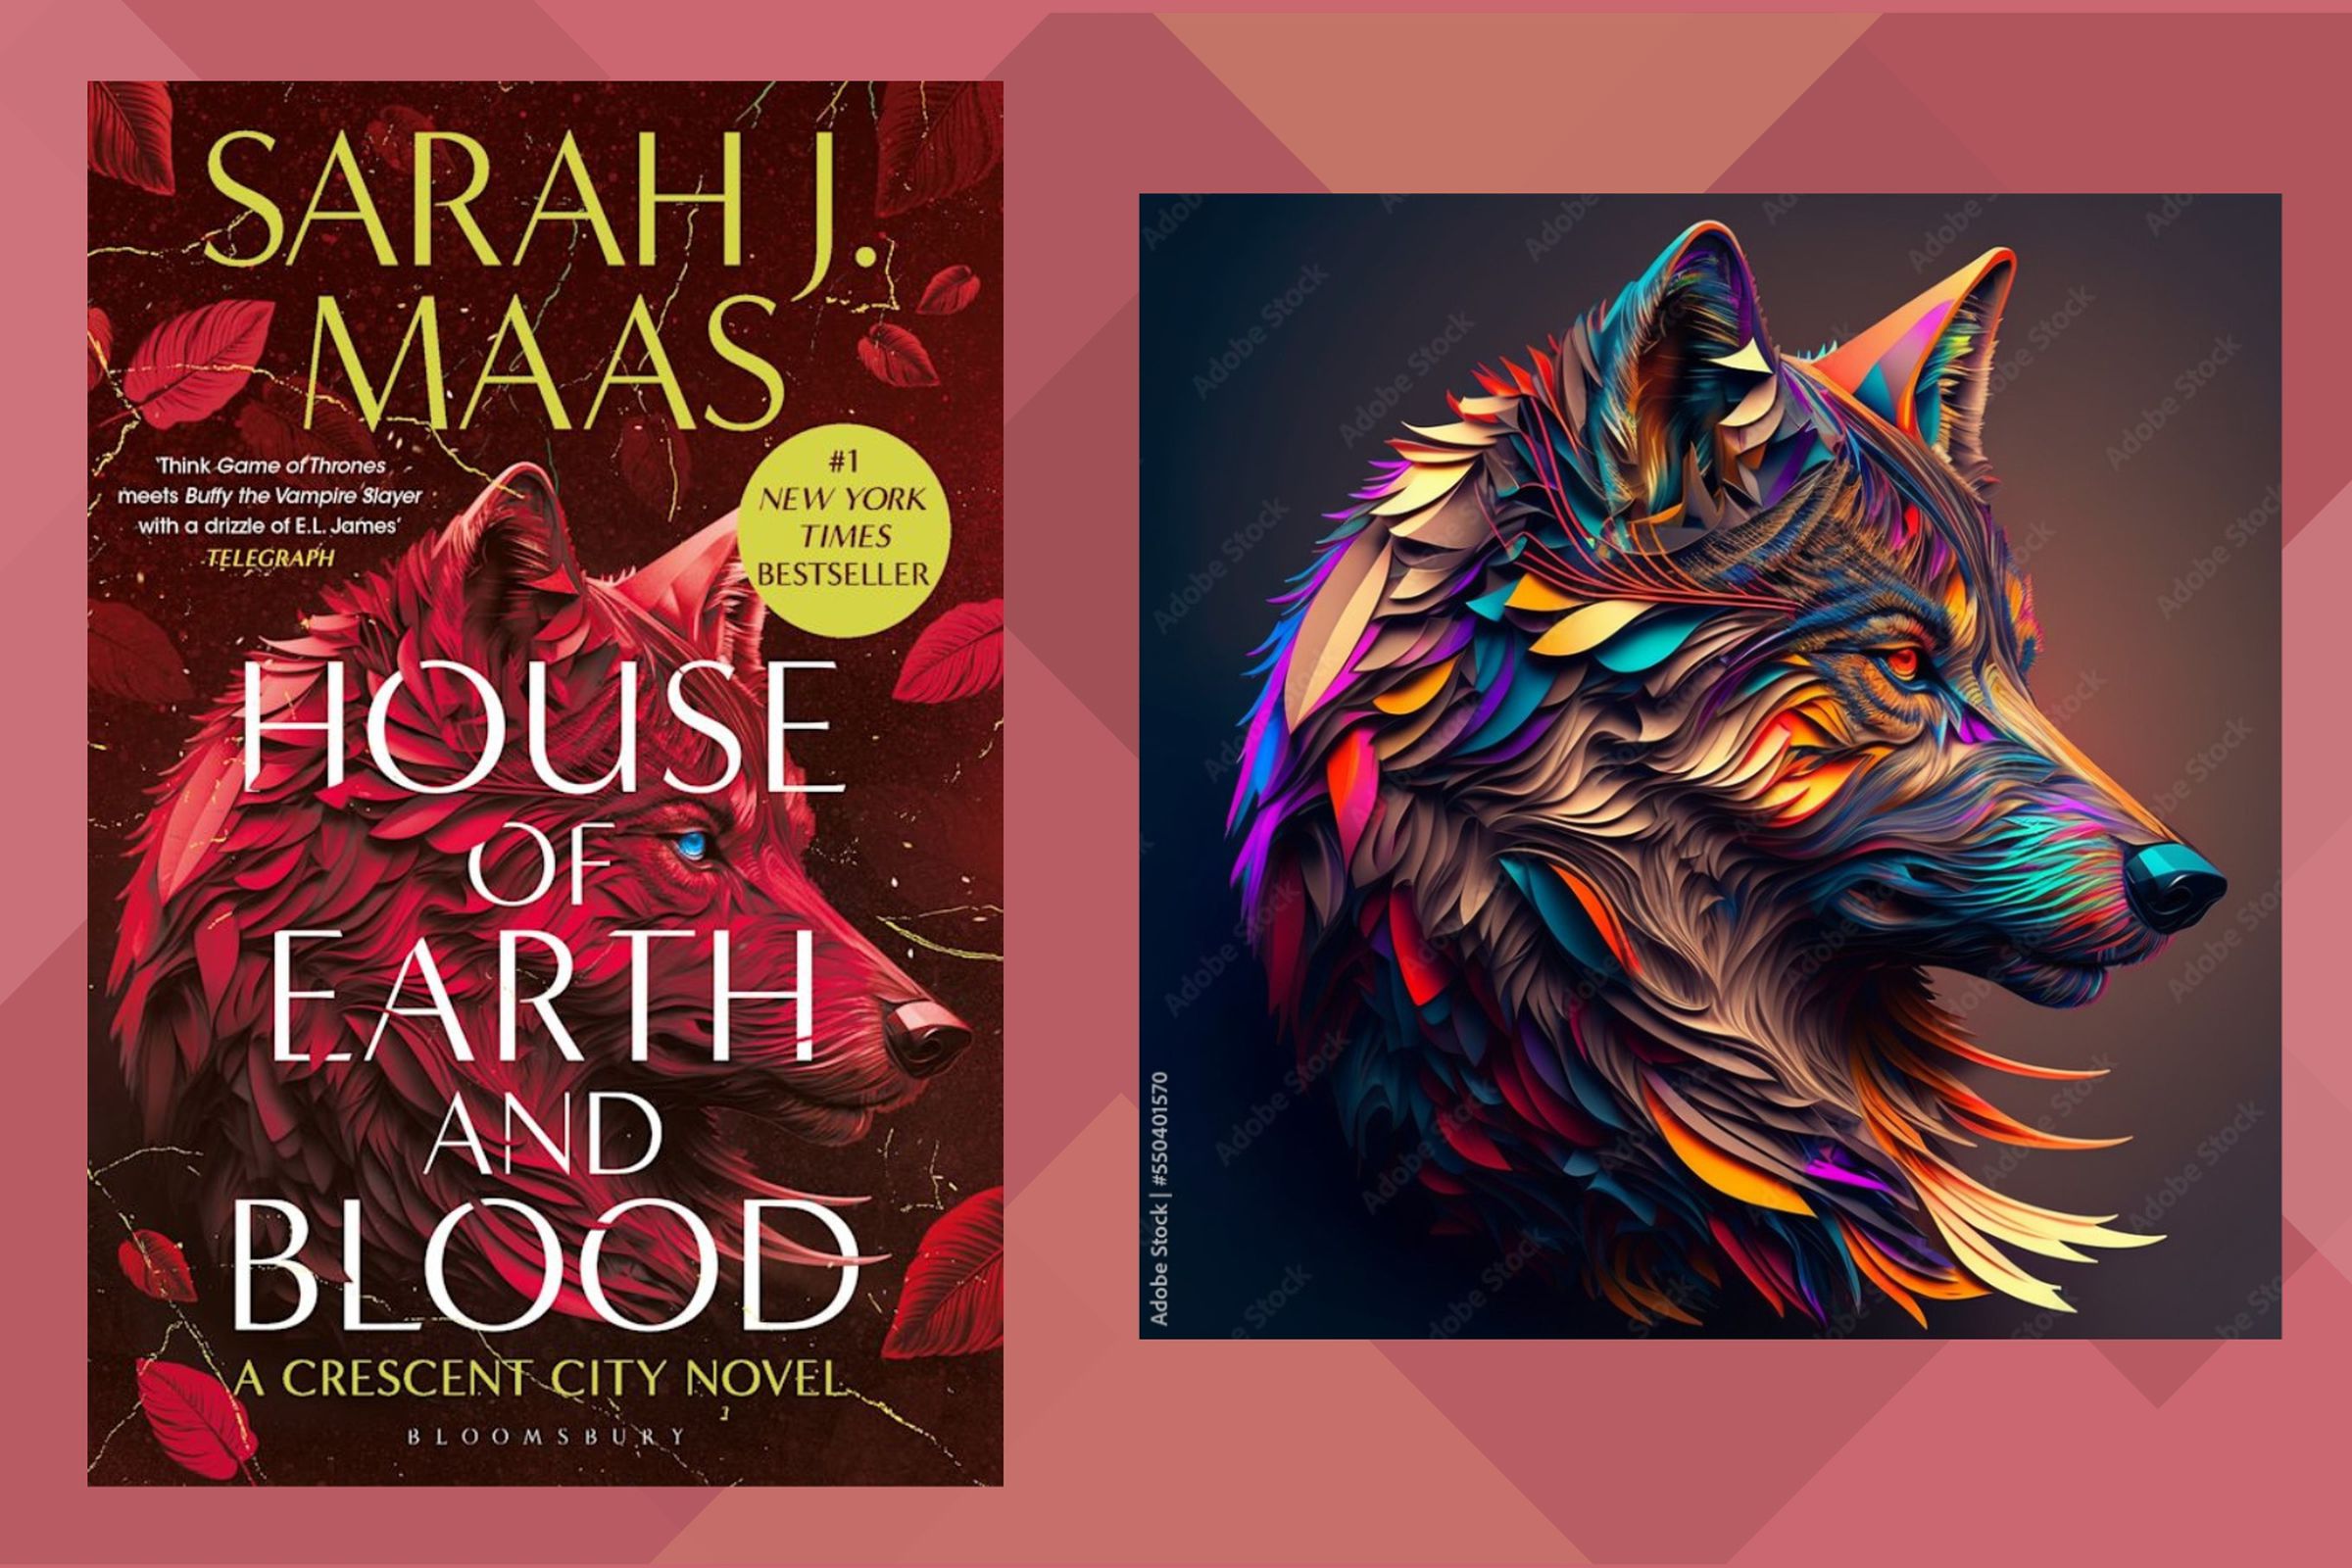 An image of the novel ‘House of Earth and Blood’ by Sarah J Maas displaying an AI-generated image of a wolf. The original AI-generated stock image is displayed besides it on the right.